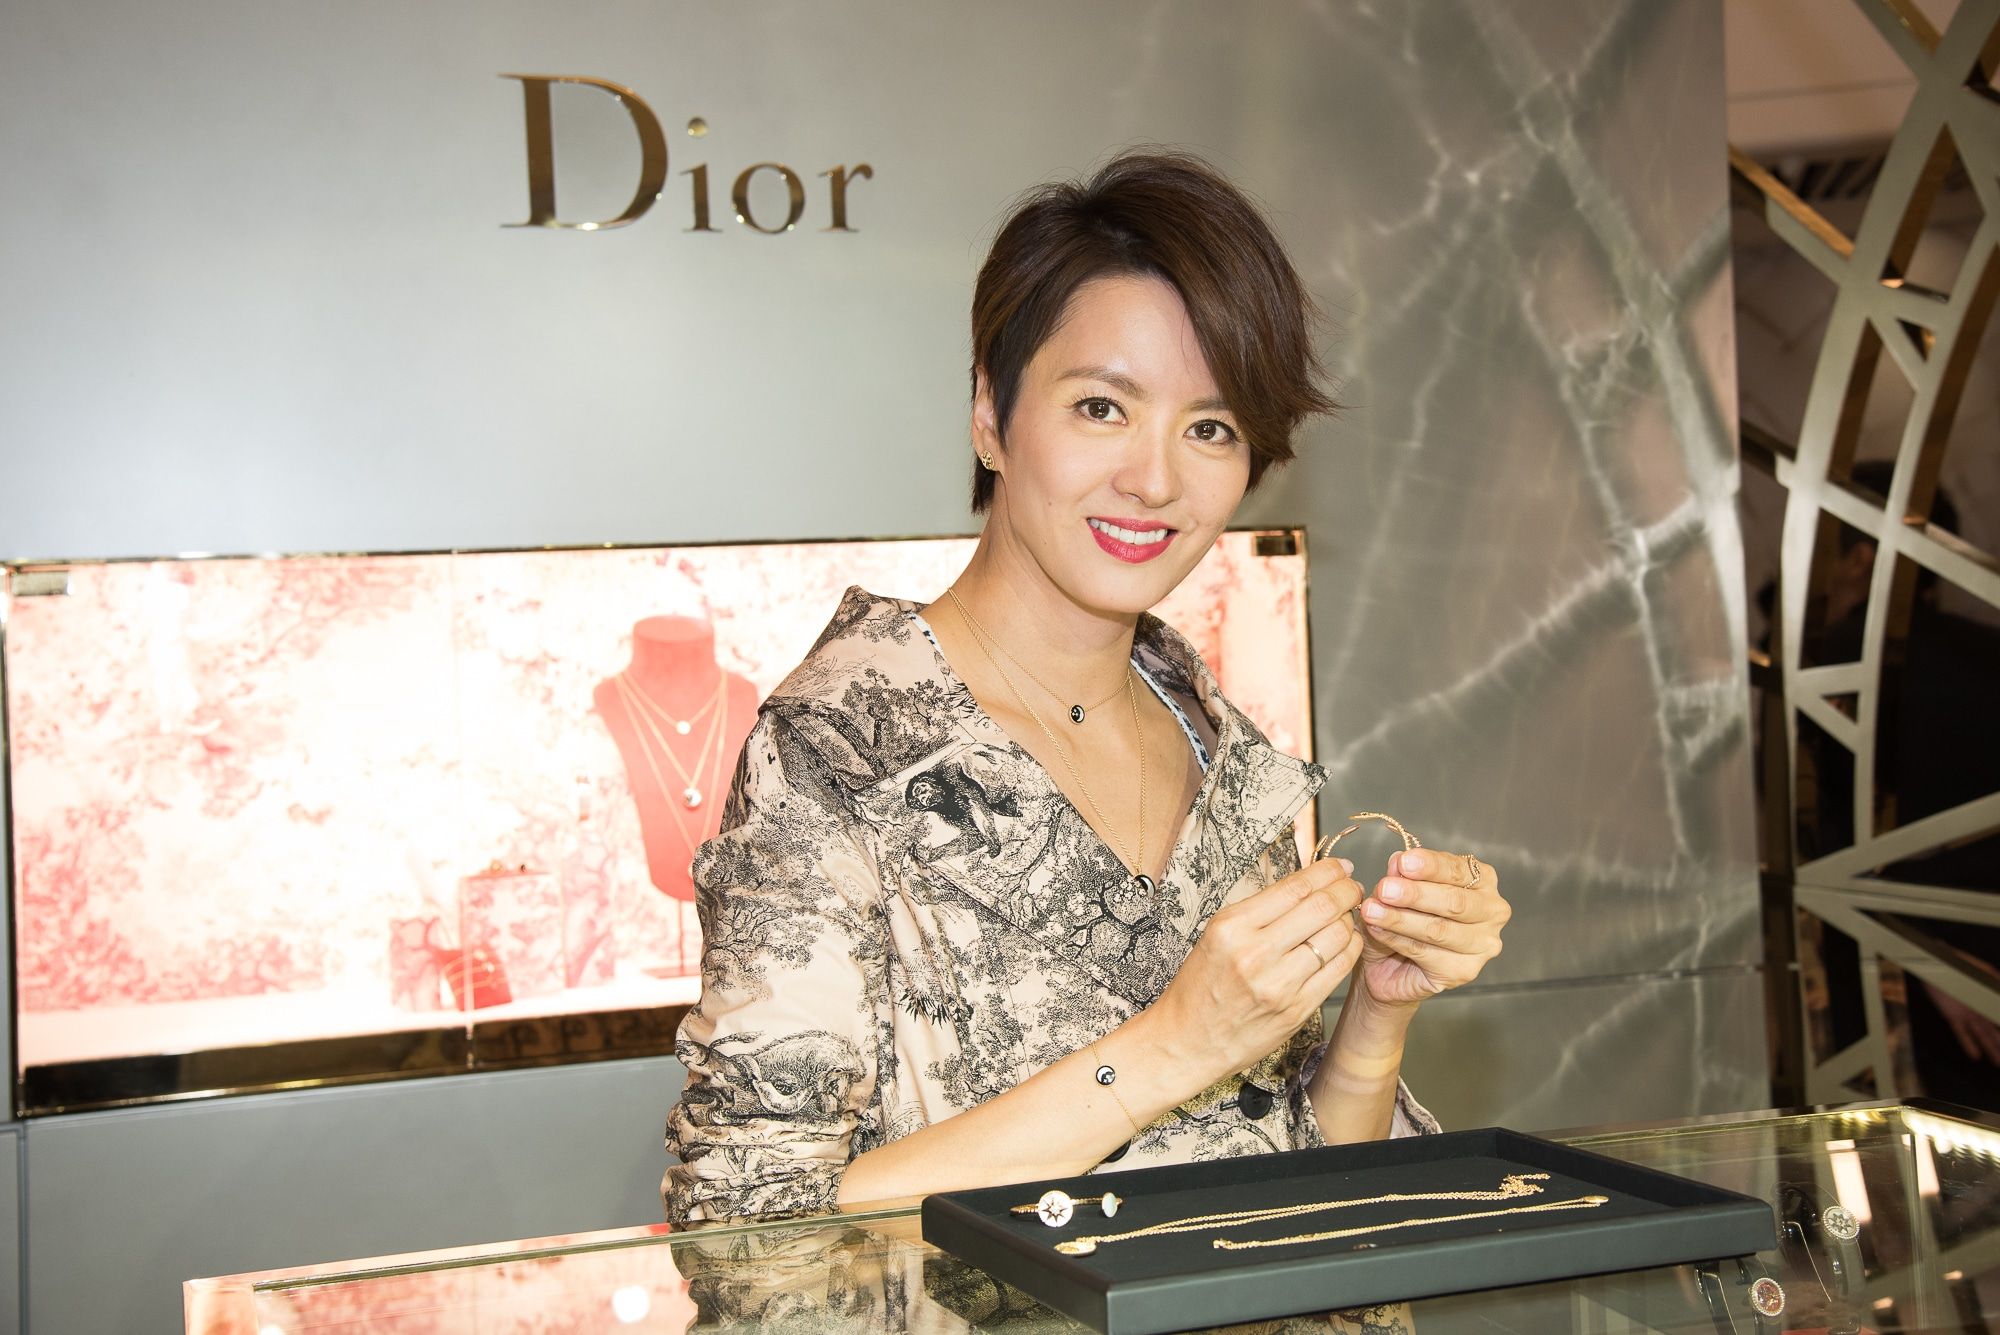 The Rosy Story Of The Dior Rose Des Vents Jewellery Collection